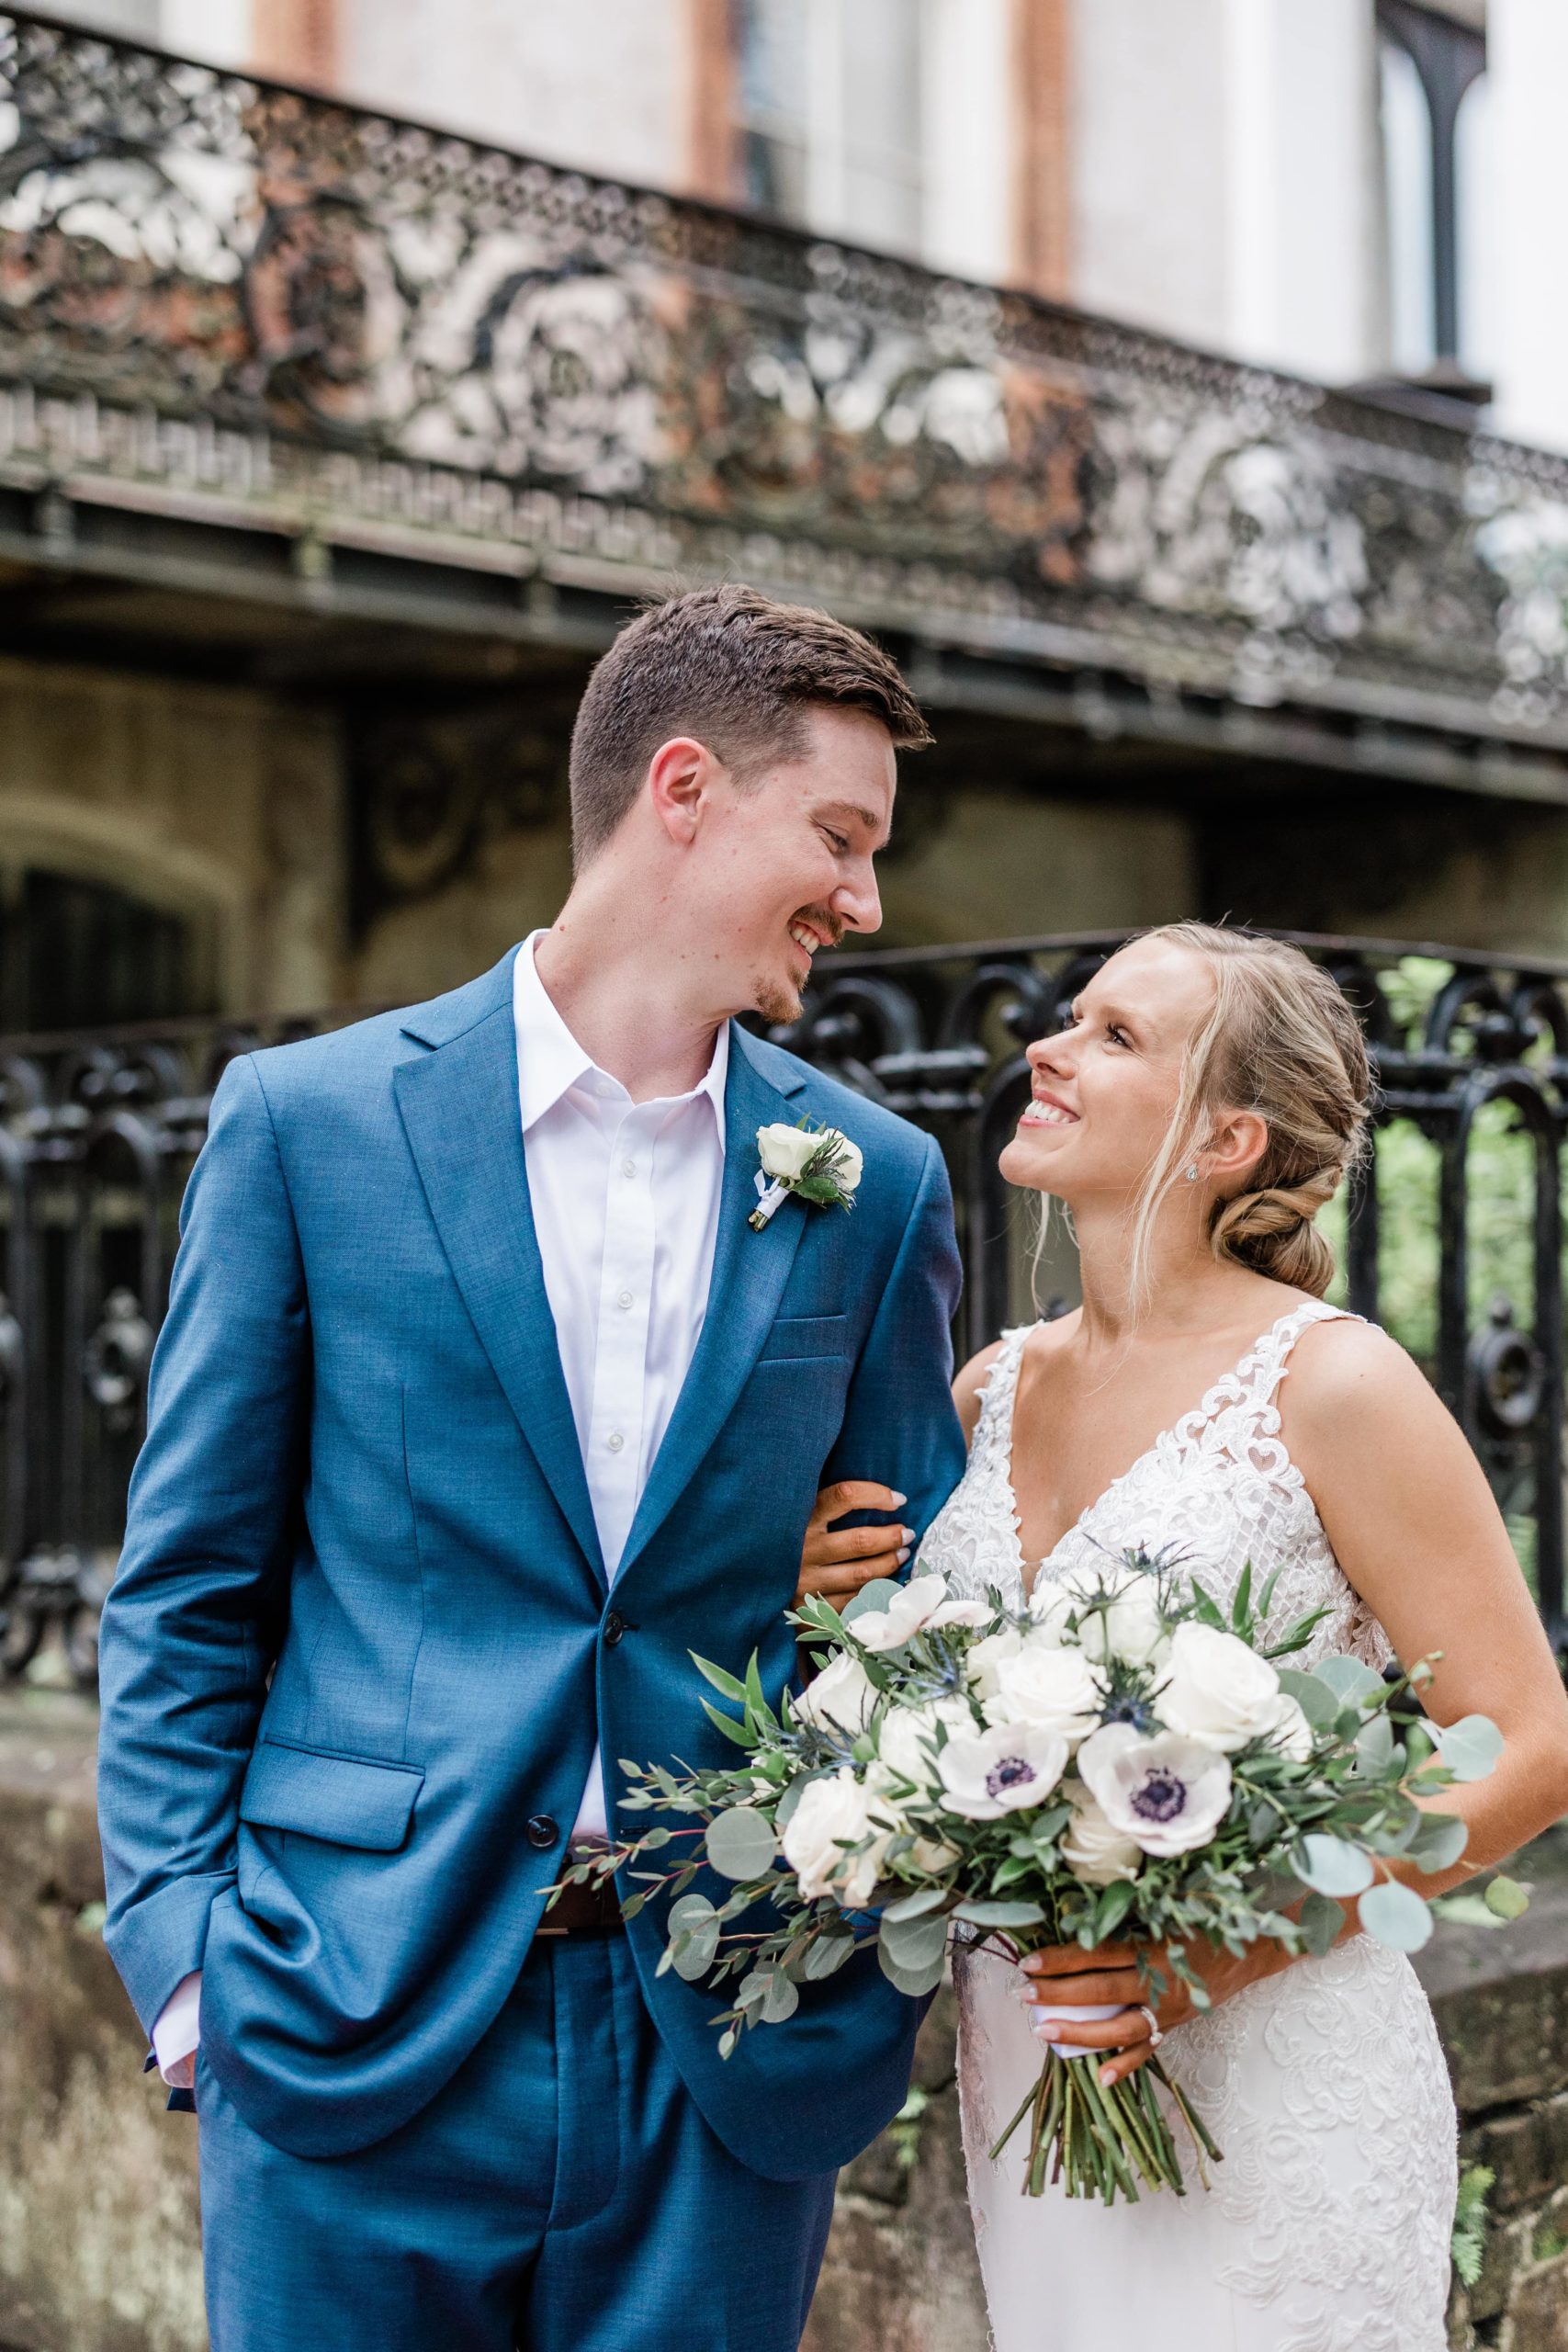 A Dreamy Whitefield Square Elopement - kirsten and kenny